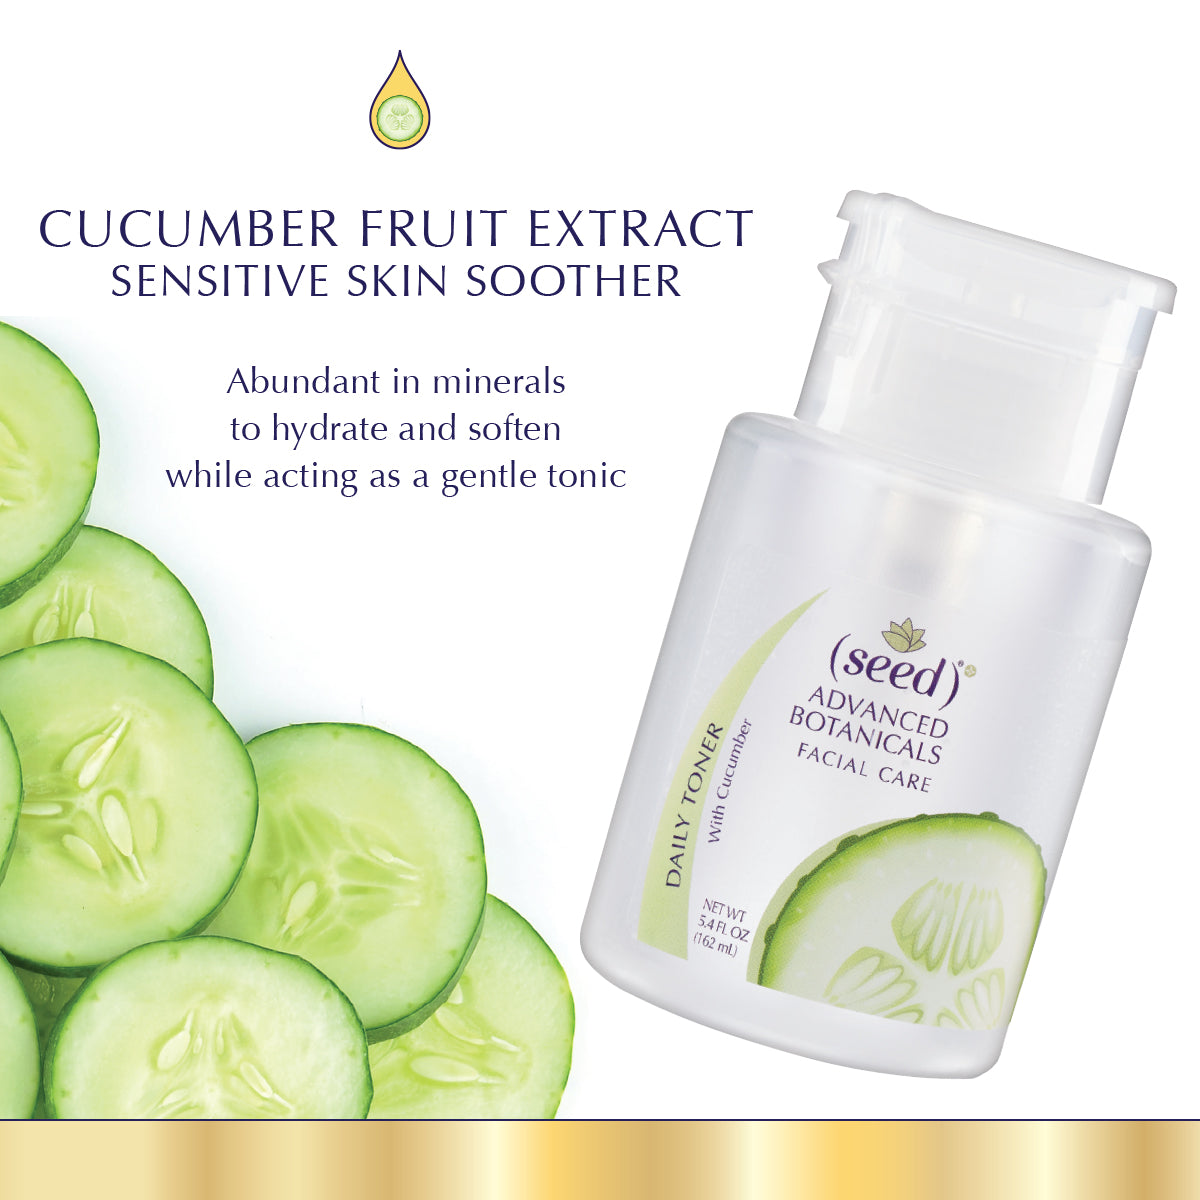 Seed Advanced Botanical Cucumber Face Toner features Cucumber Fruit Extract